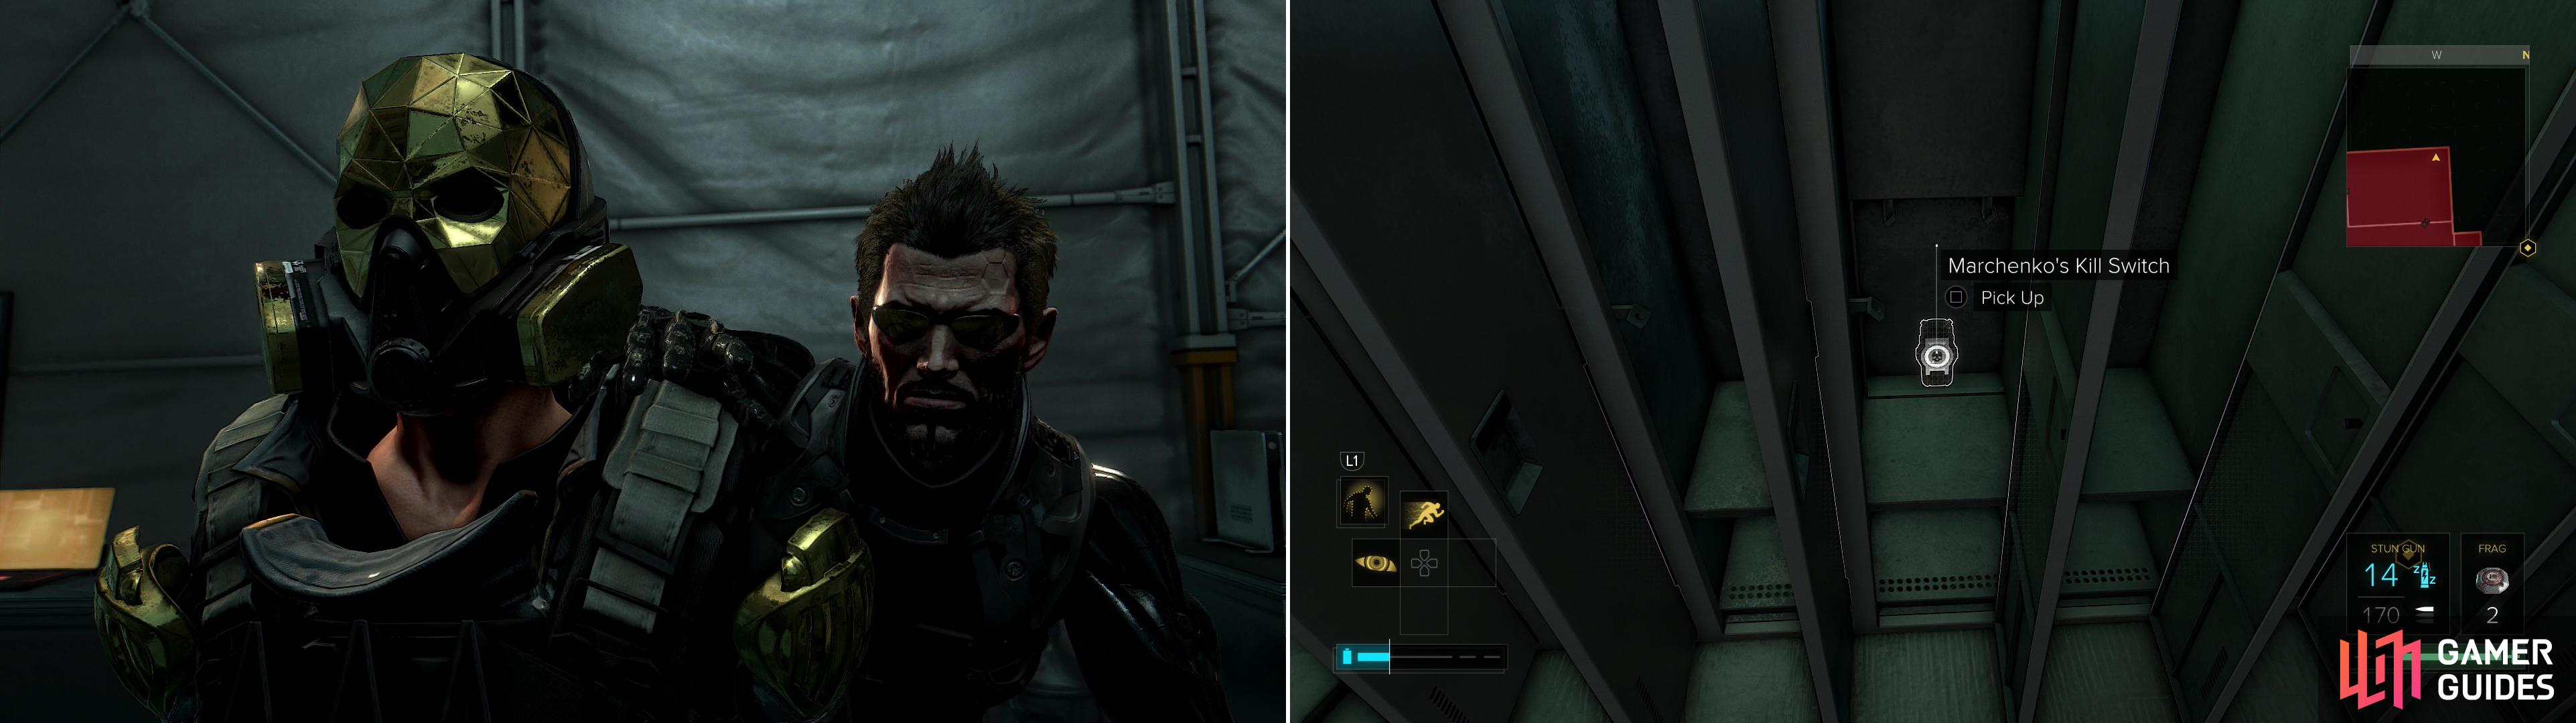 Eliminate several guards in a tent (left) then search some lockers to find Marchenko’s Kill Switch (right).